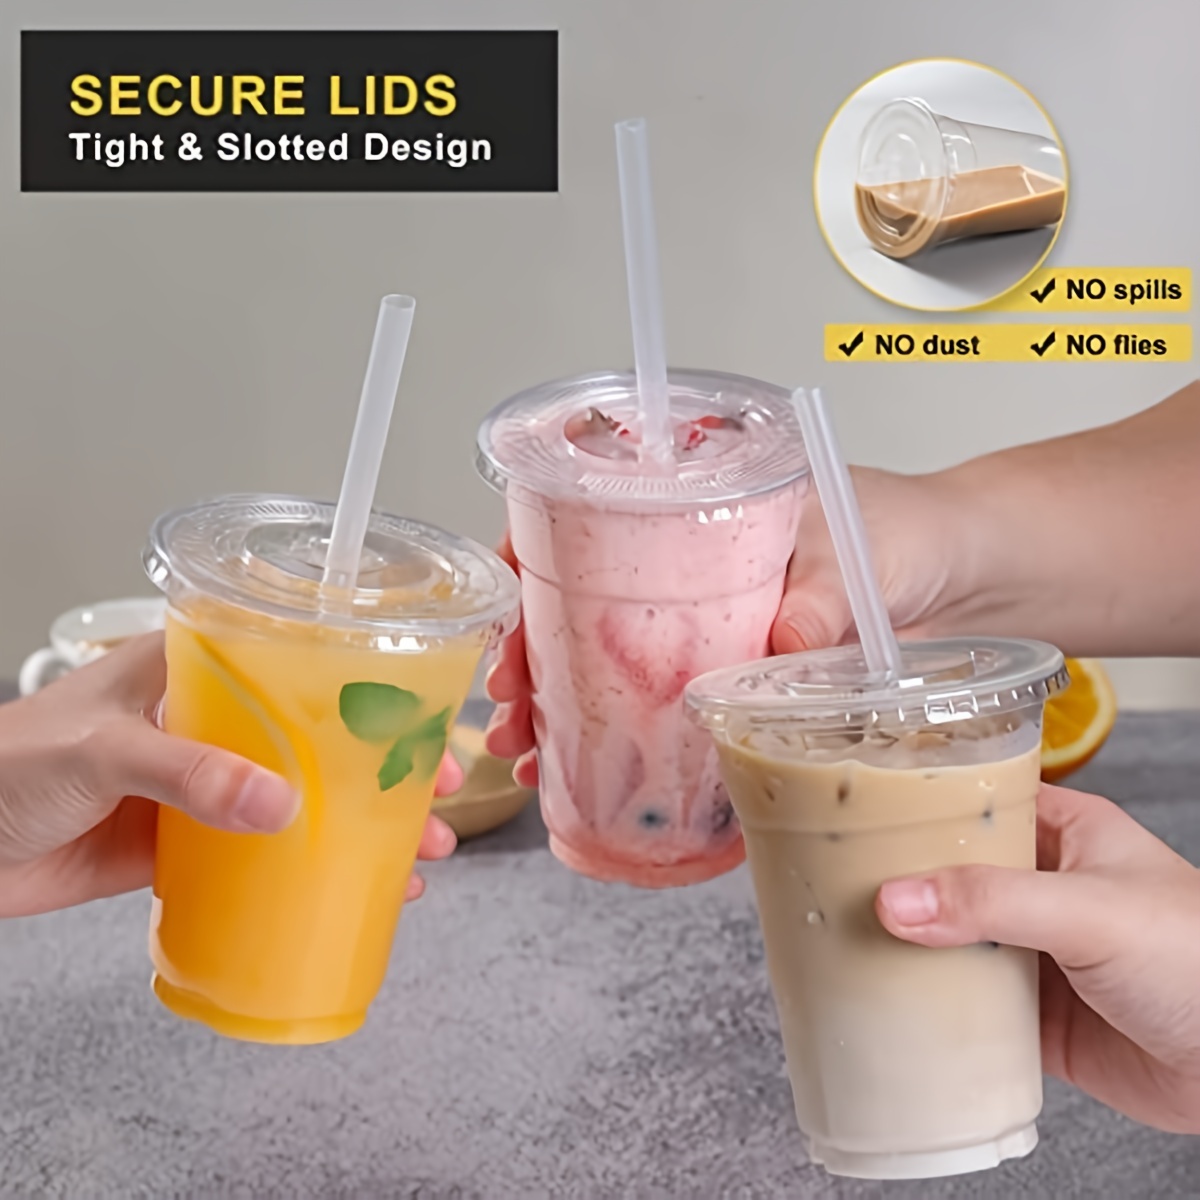 Cups Slim Cup UCup - Milk Tea and Baking Supplies - Bicol